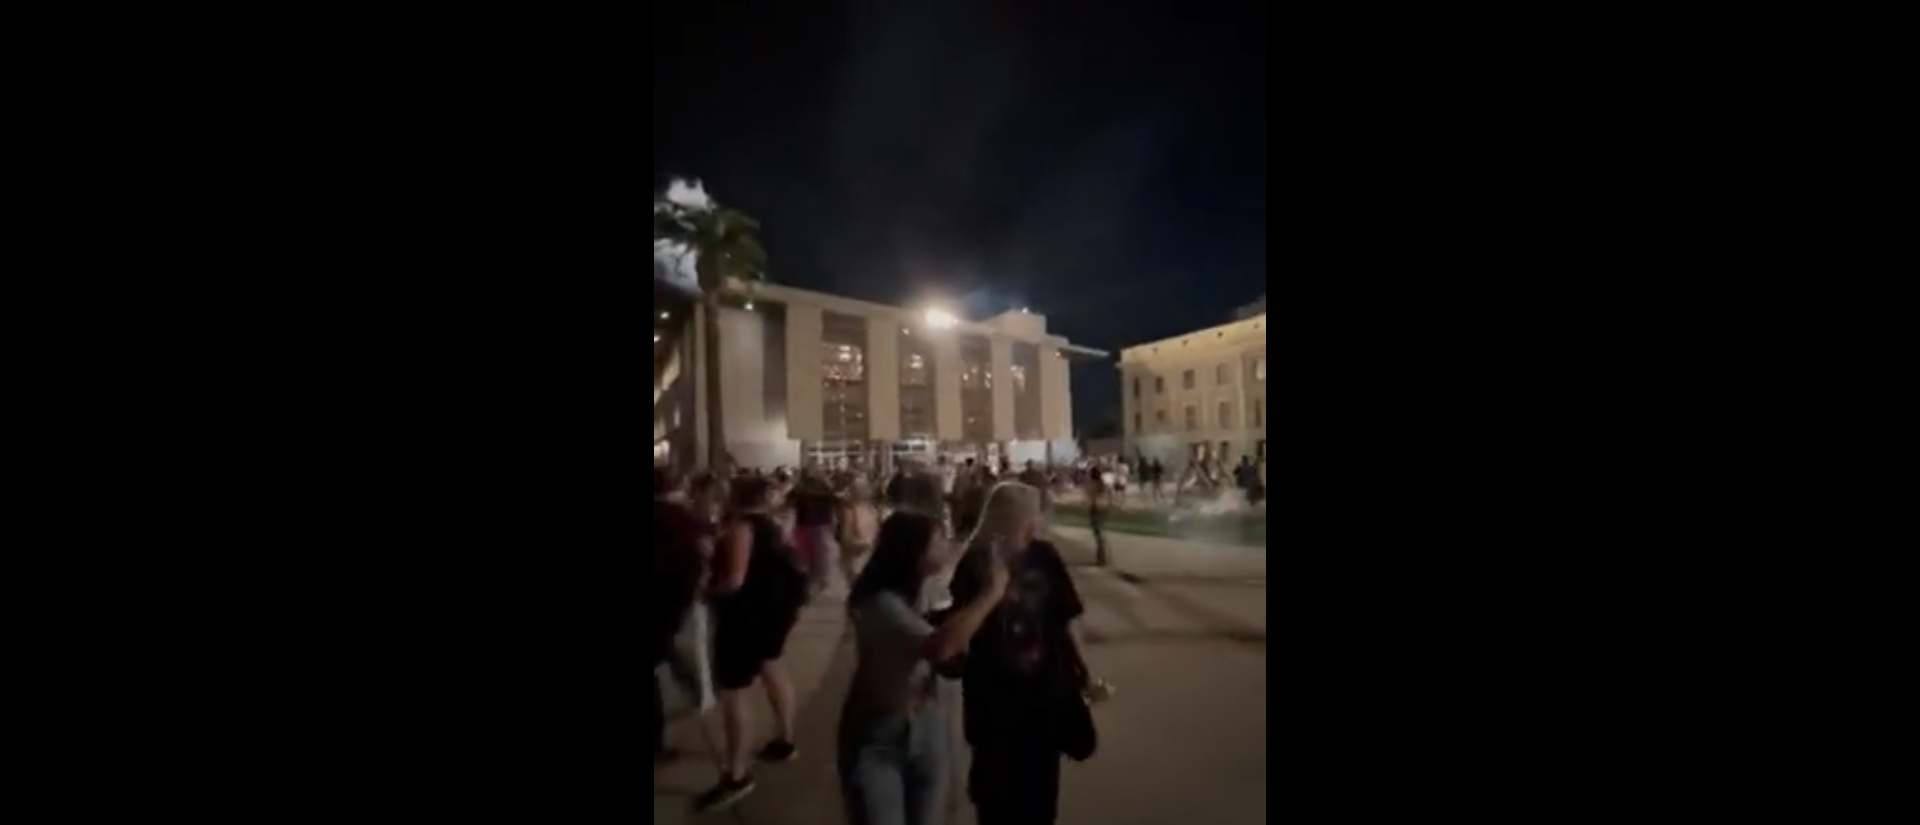 Pro-Abortion Protest Turns Violent: Lawmakers ‘Held Hostage’ In Arizona Capitol